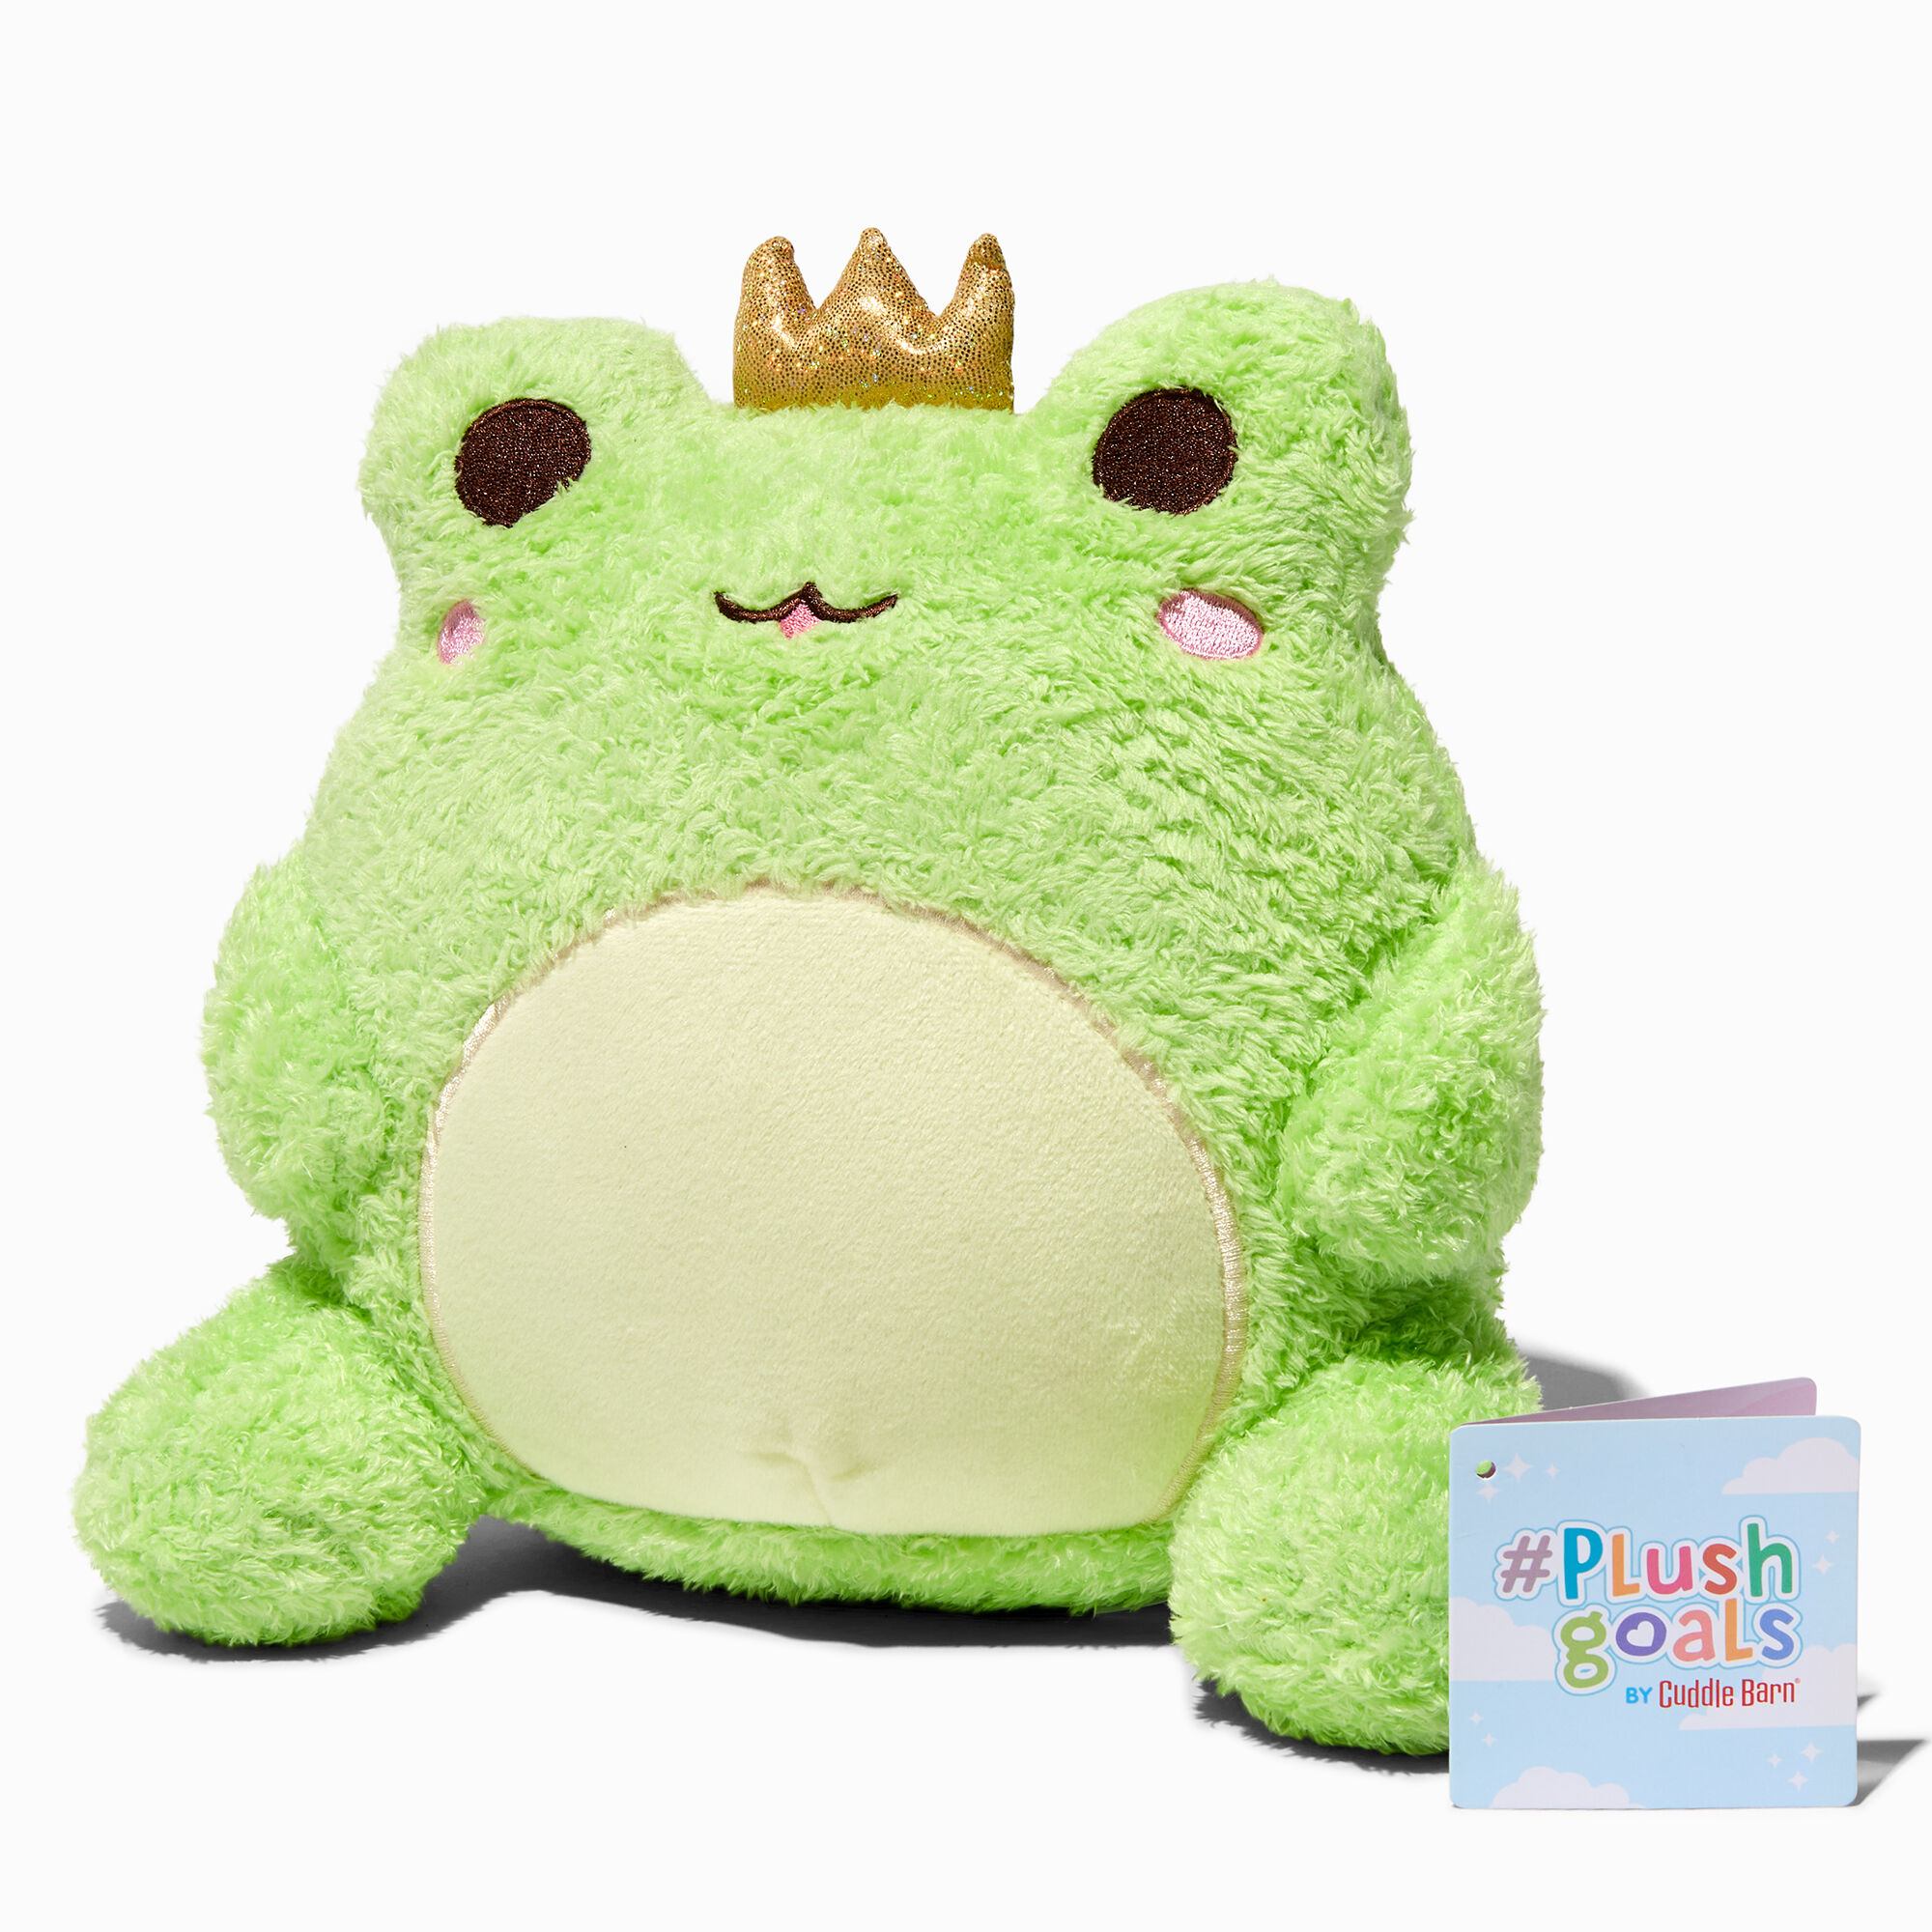 View Claires Cuddle Barn Plush Goals 9 Frog Prince Wawa Toy Green information